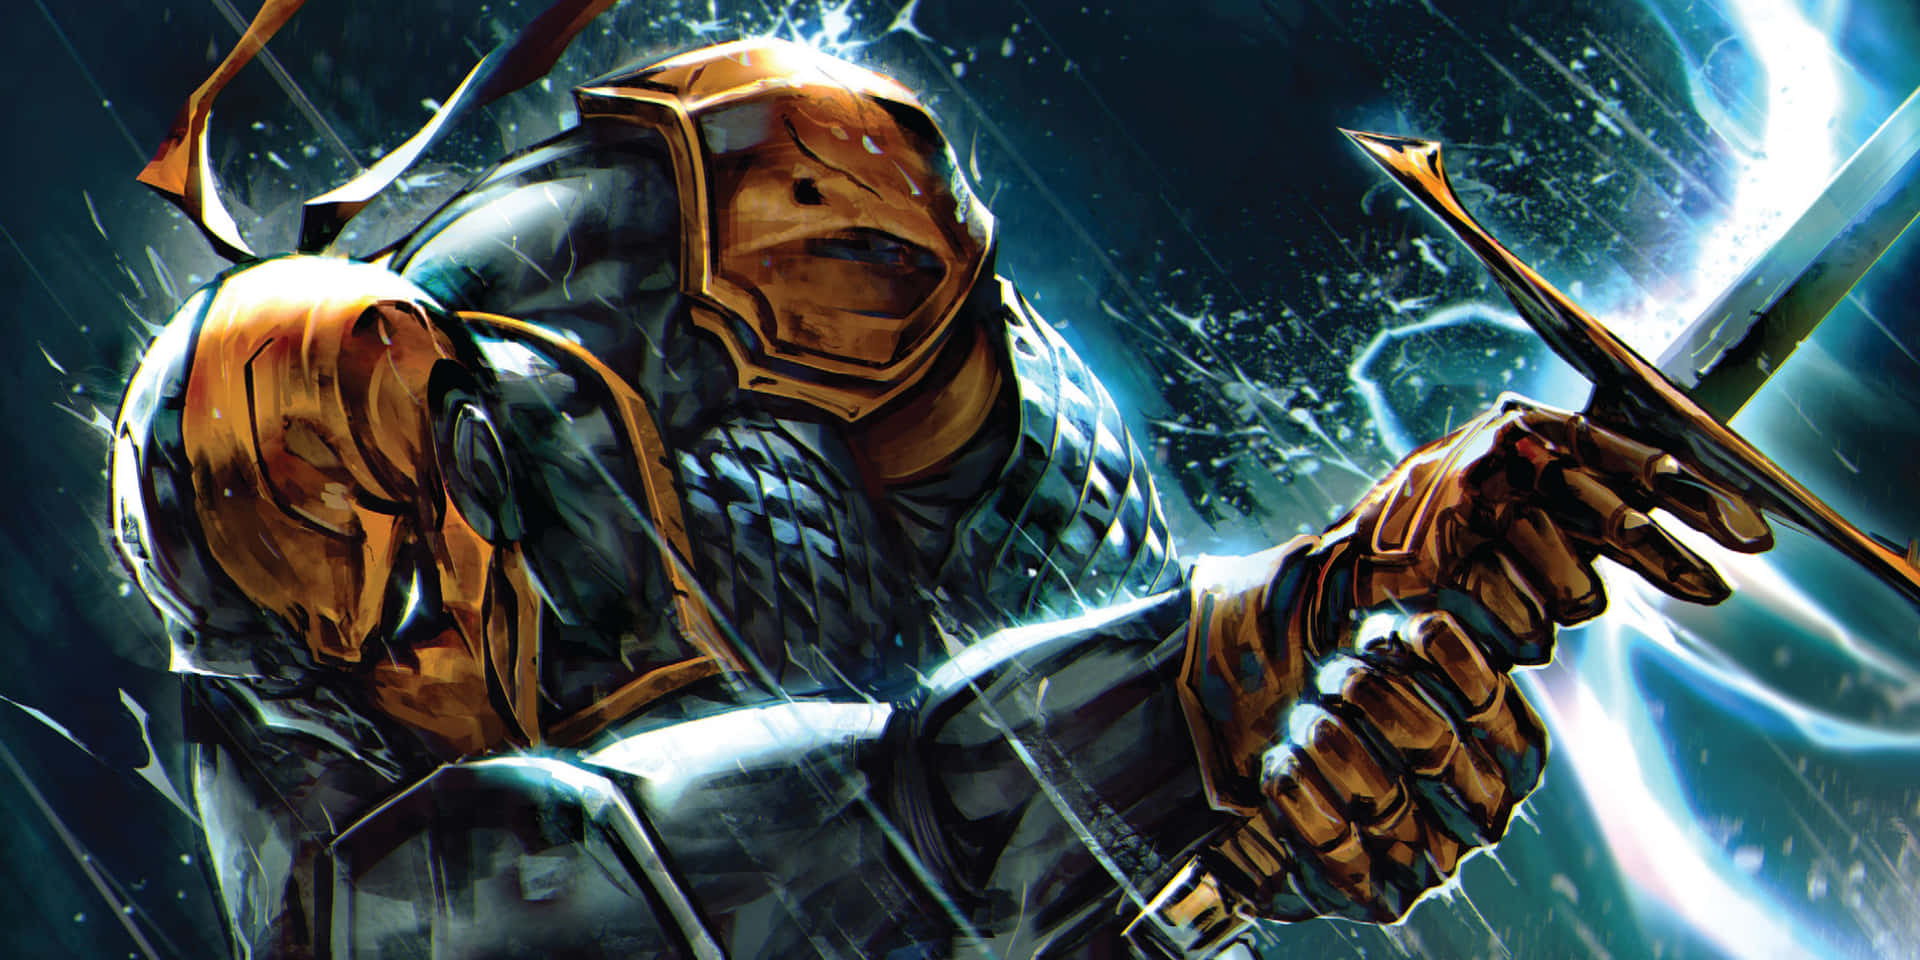 Deathstroke, the ultimate assassin